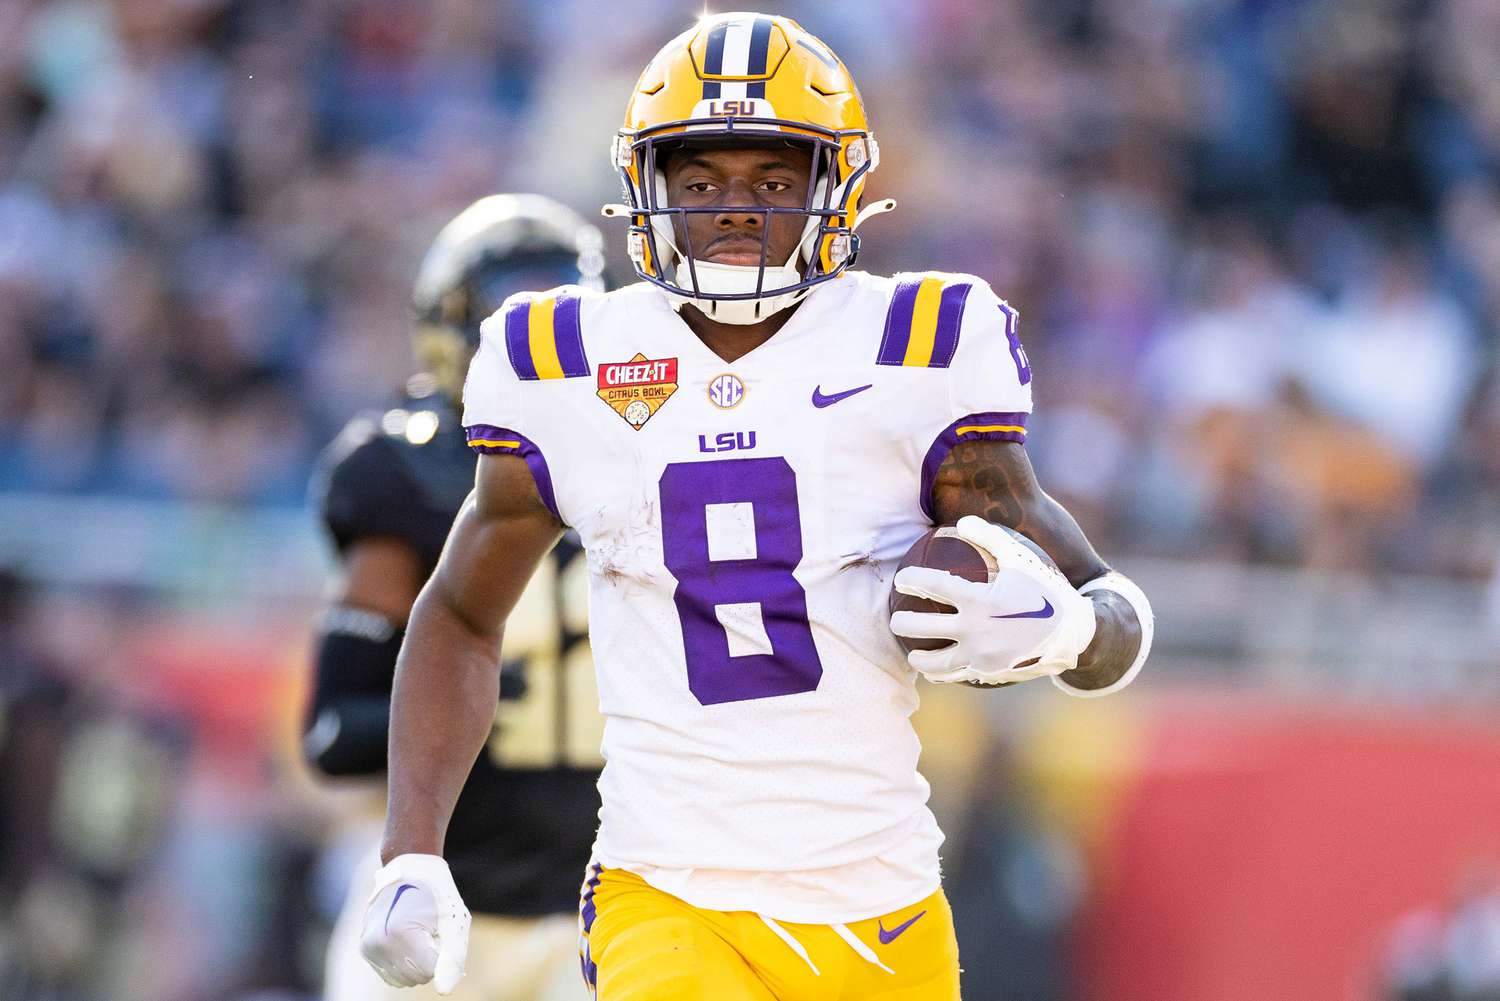 Jan 2, 2023; Orlando, FL, USA; LSU Tigers wide receiver Malik Nabers (8) rushes with the ball for a touchdown during the second half against the Purdue Boilermakers at Camping World Stadium.